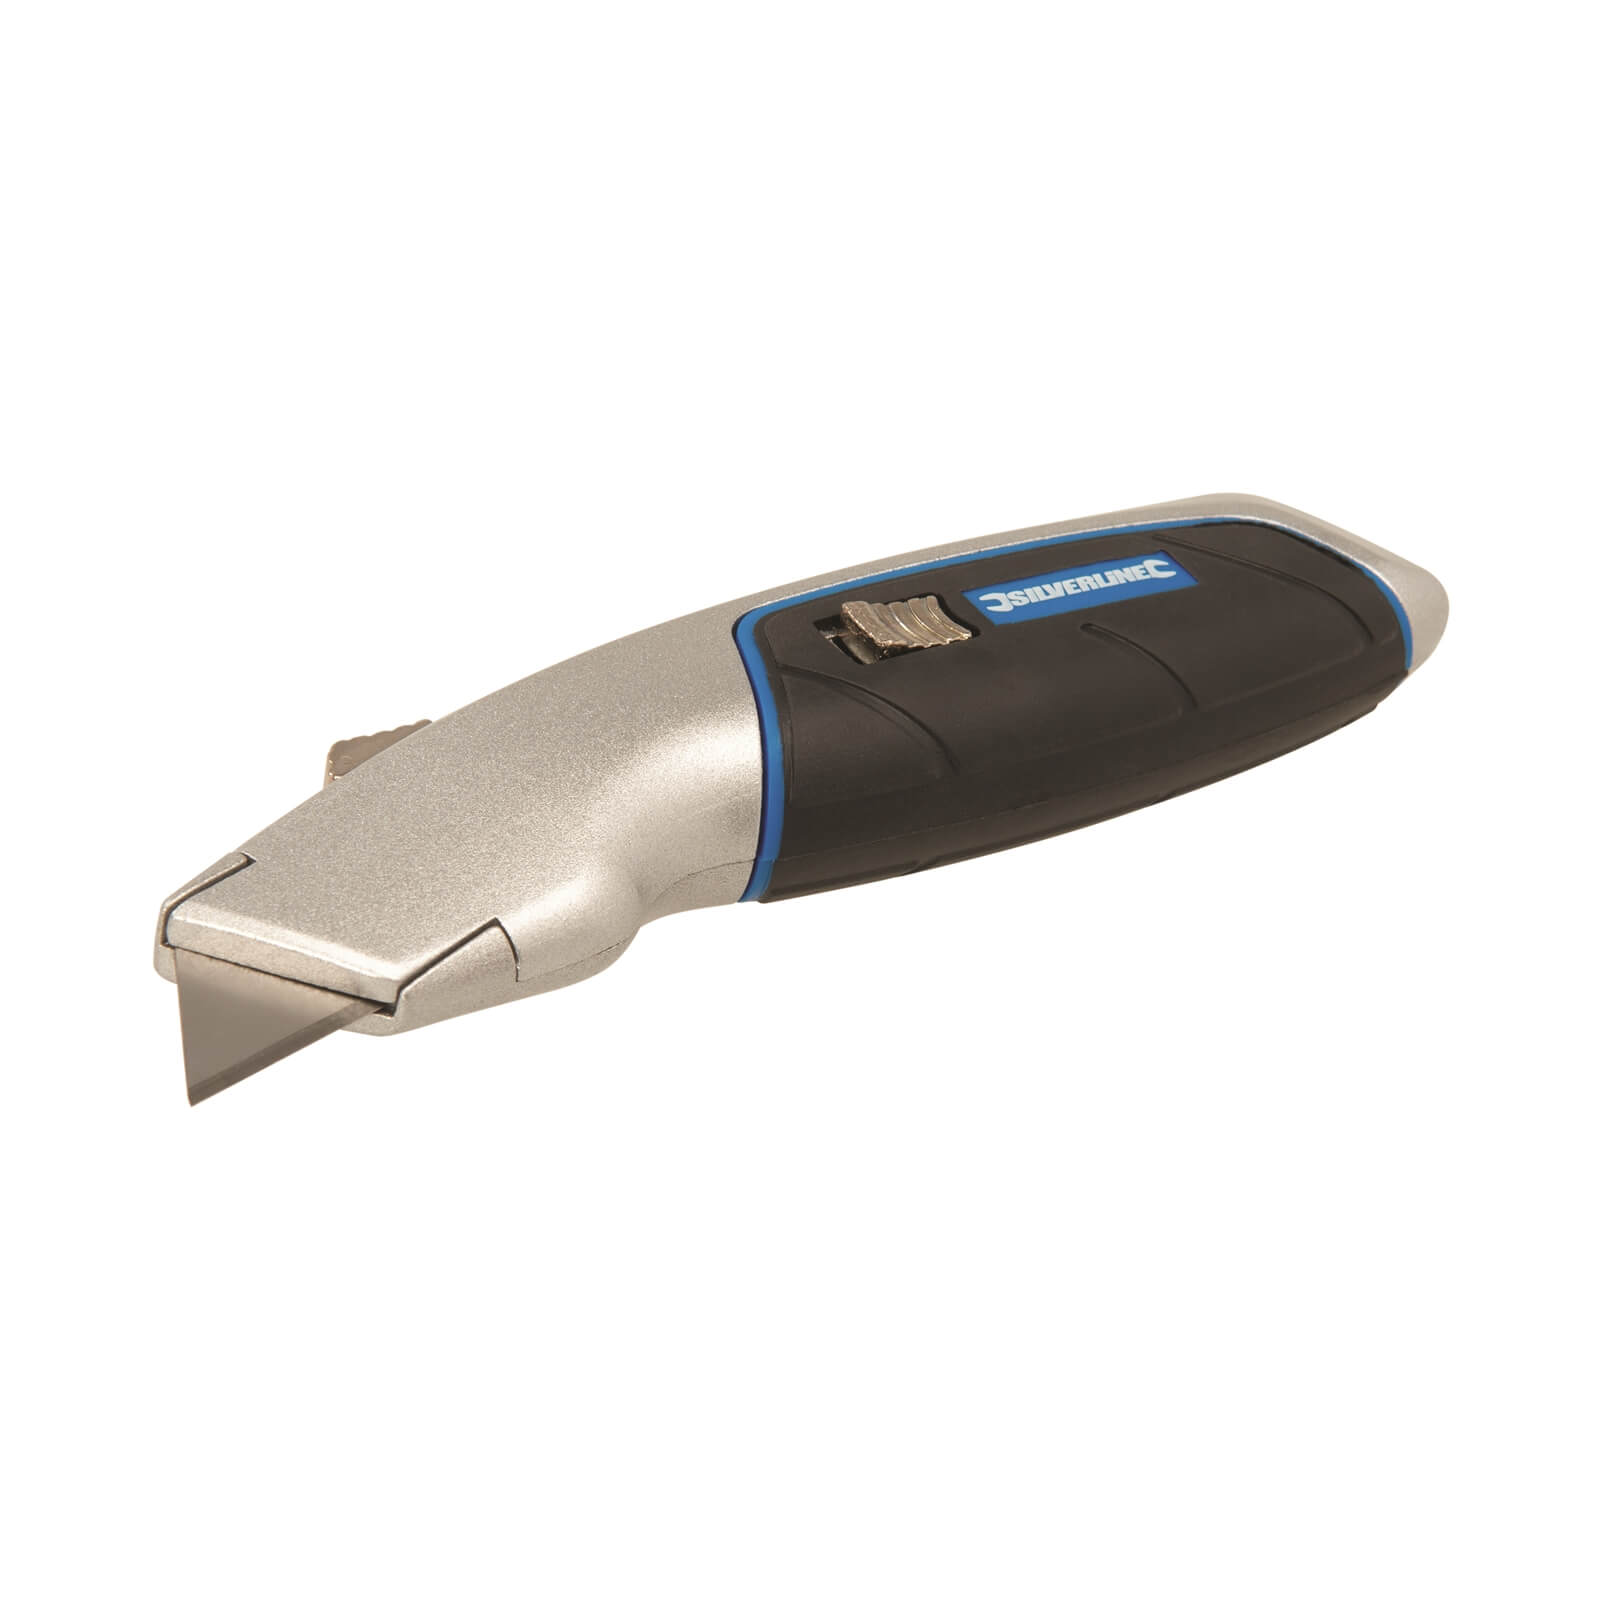 Silverline Quick-Change Retractable Knife 175mm